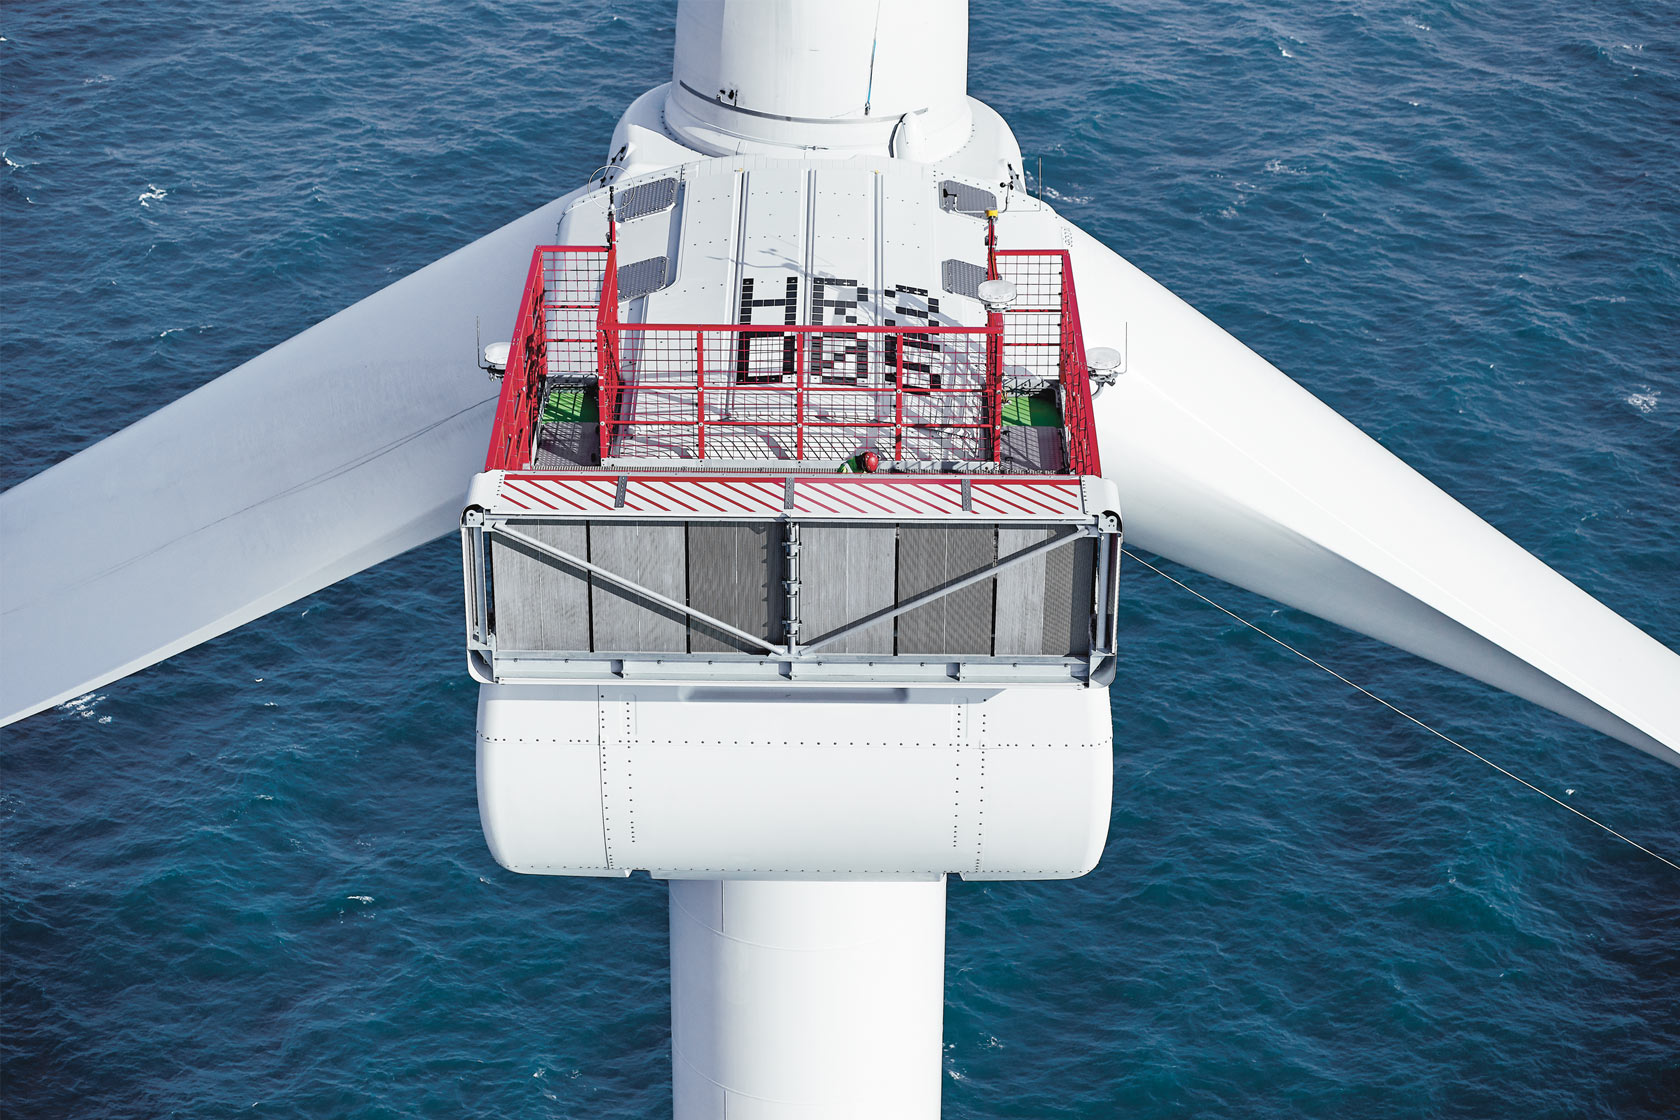 A turbine at Horns Rev offshore wind farm